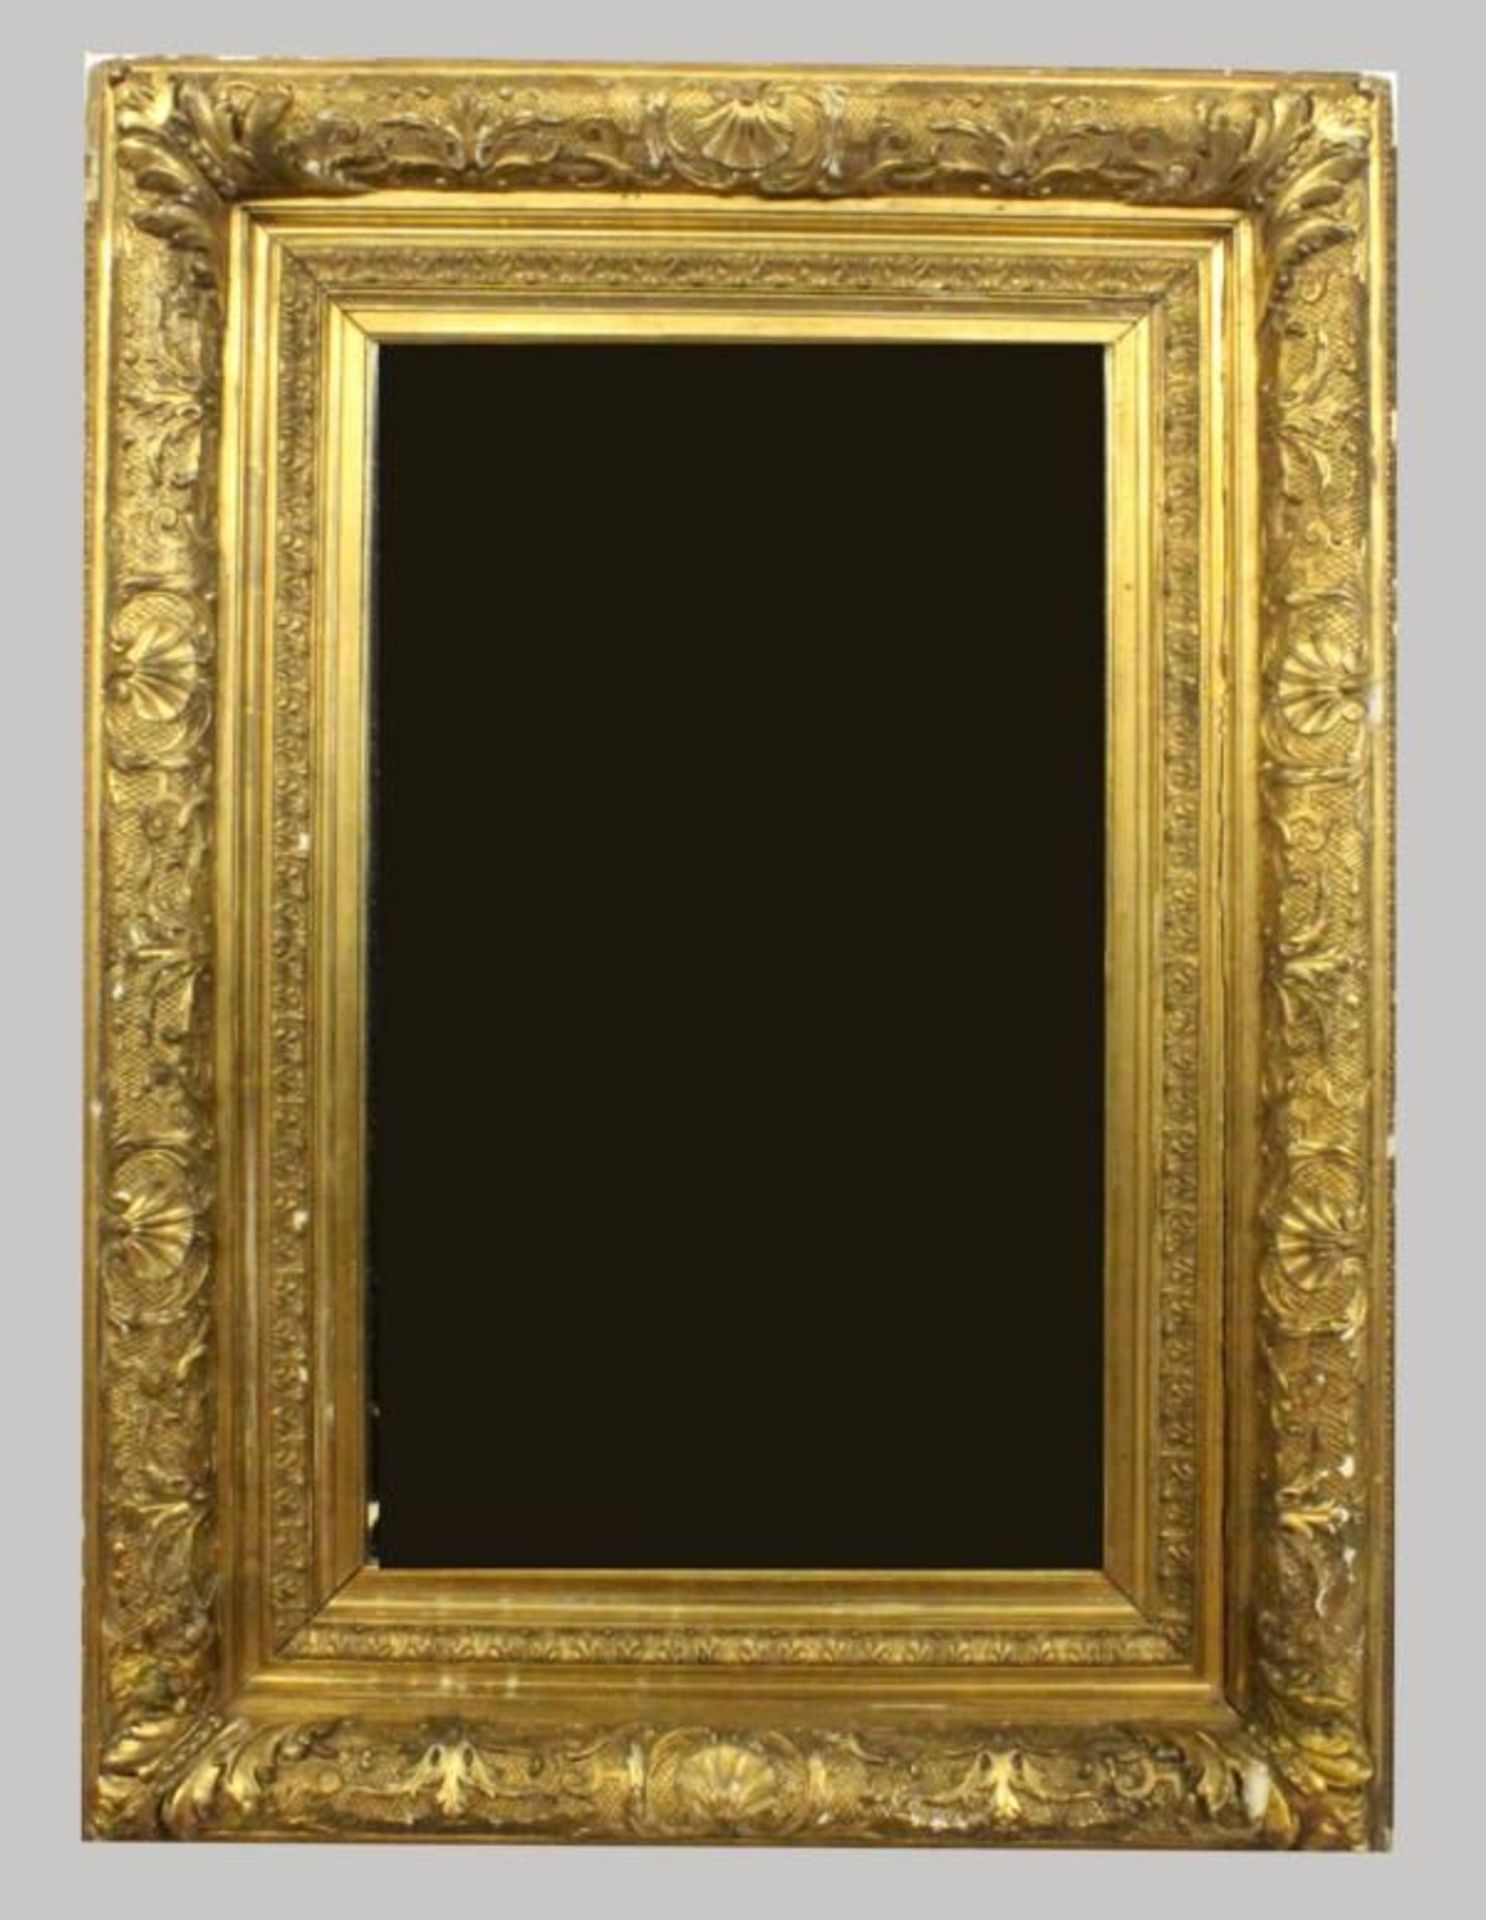 A WALL MIRROR with gilded baroque frame, 119x89cm. Condition: Damaged.    Starting price: 120